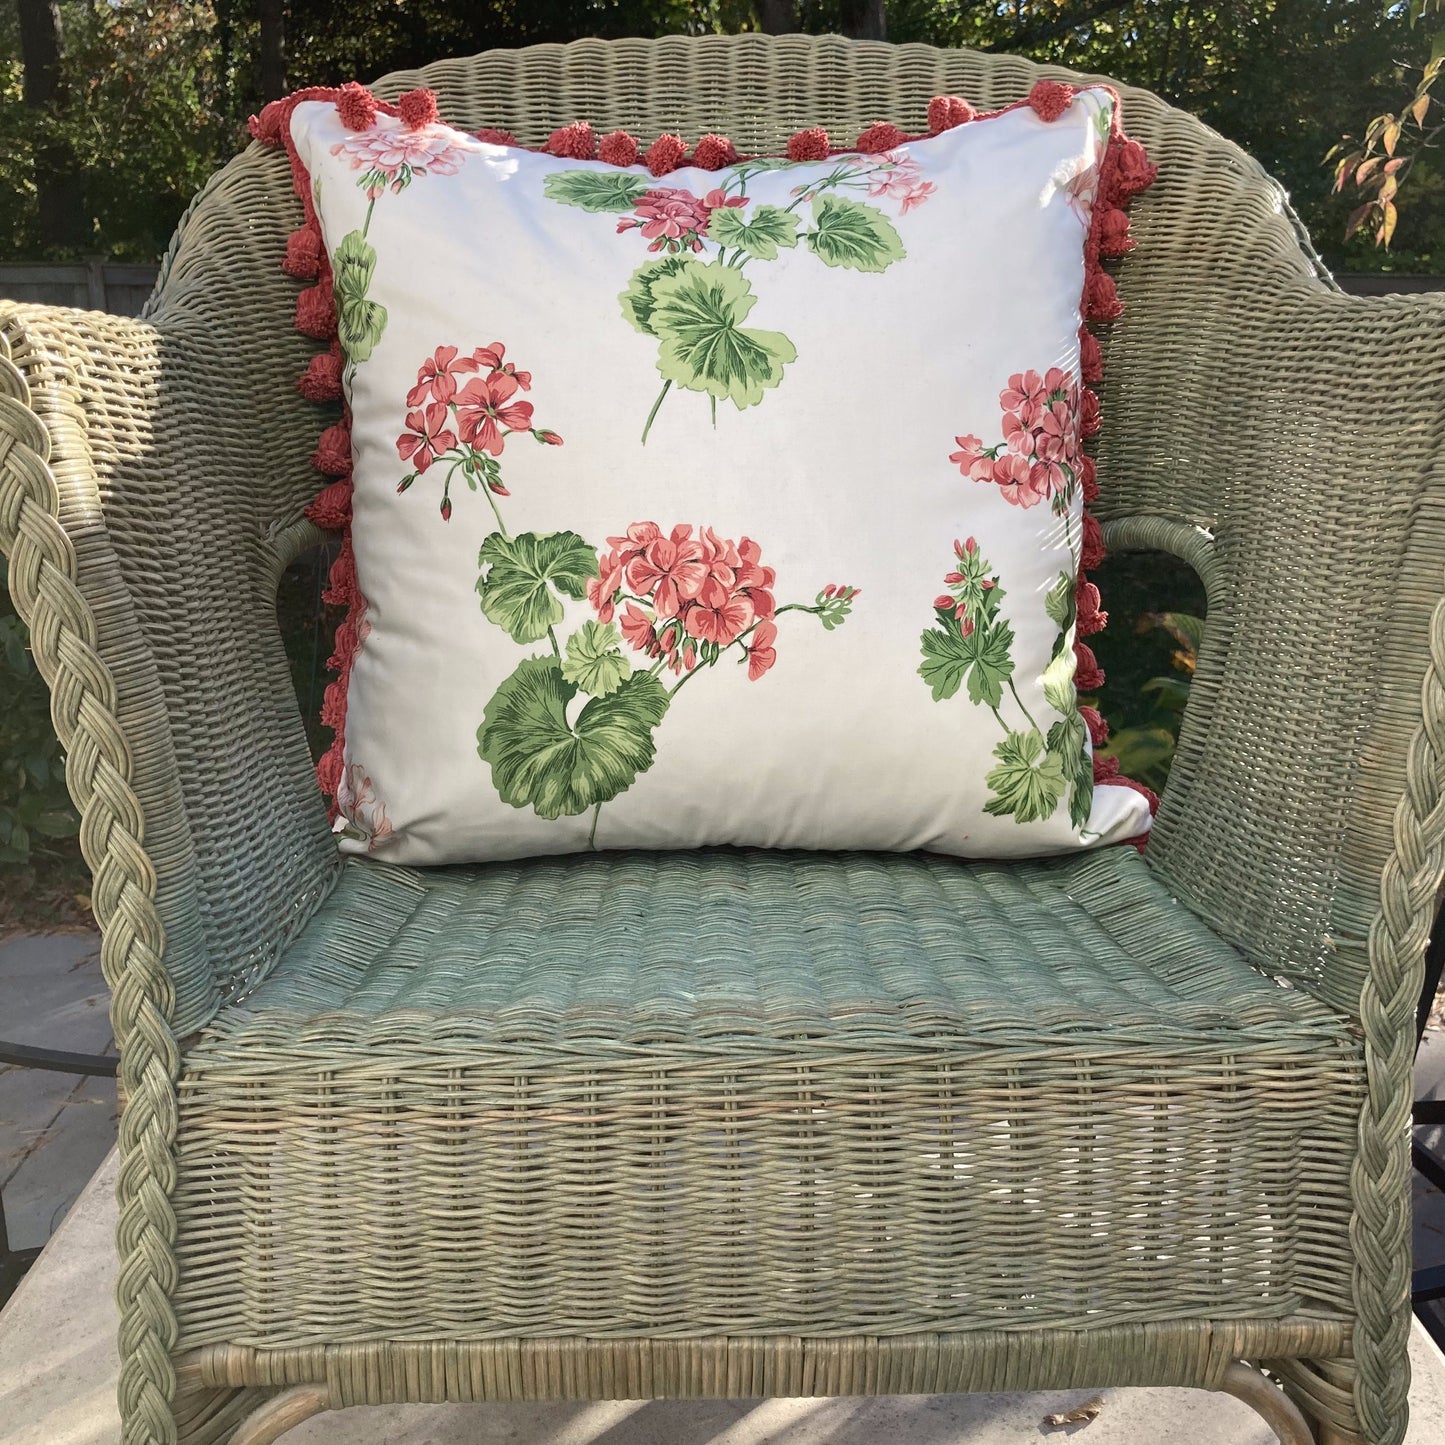 Red Geranium 22 x 22 Inches Decorative Designer Pillow Front with Down Feather Insert